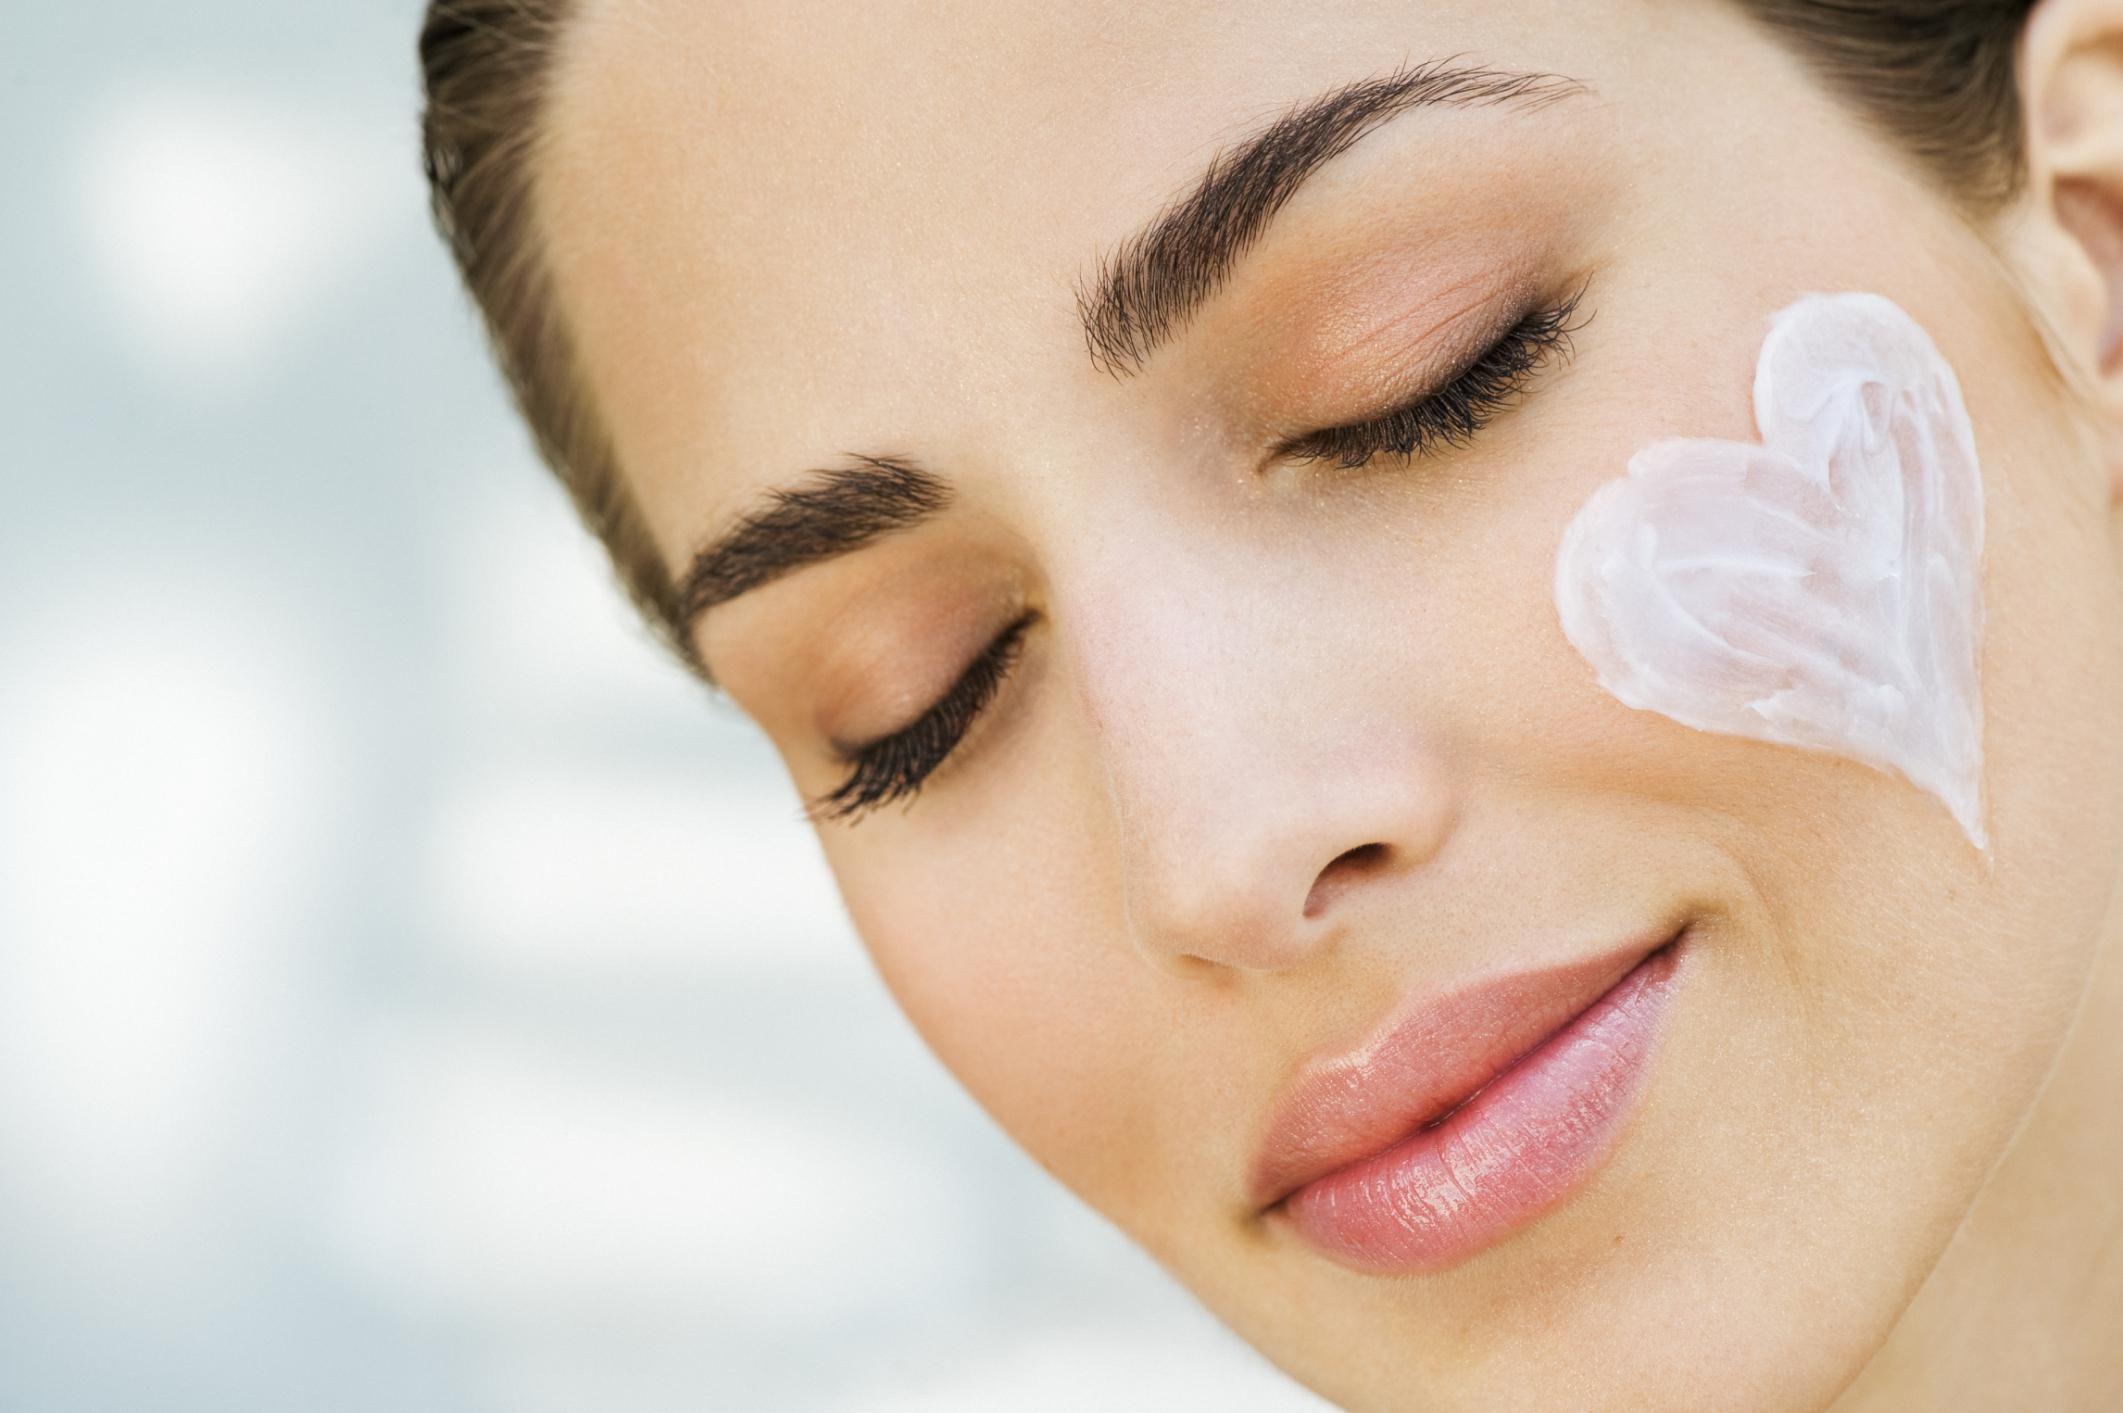 Skin Care Tips for Your 30s